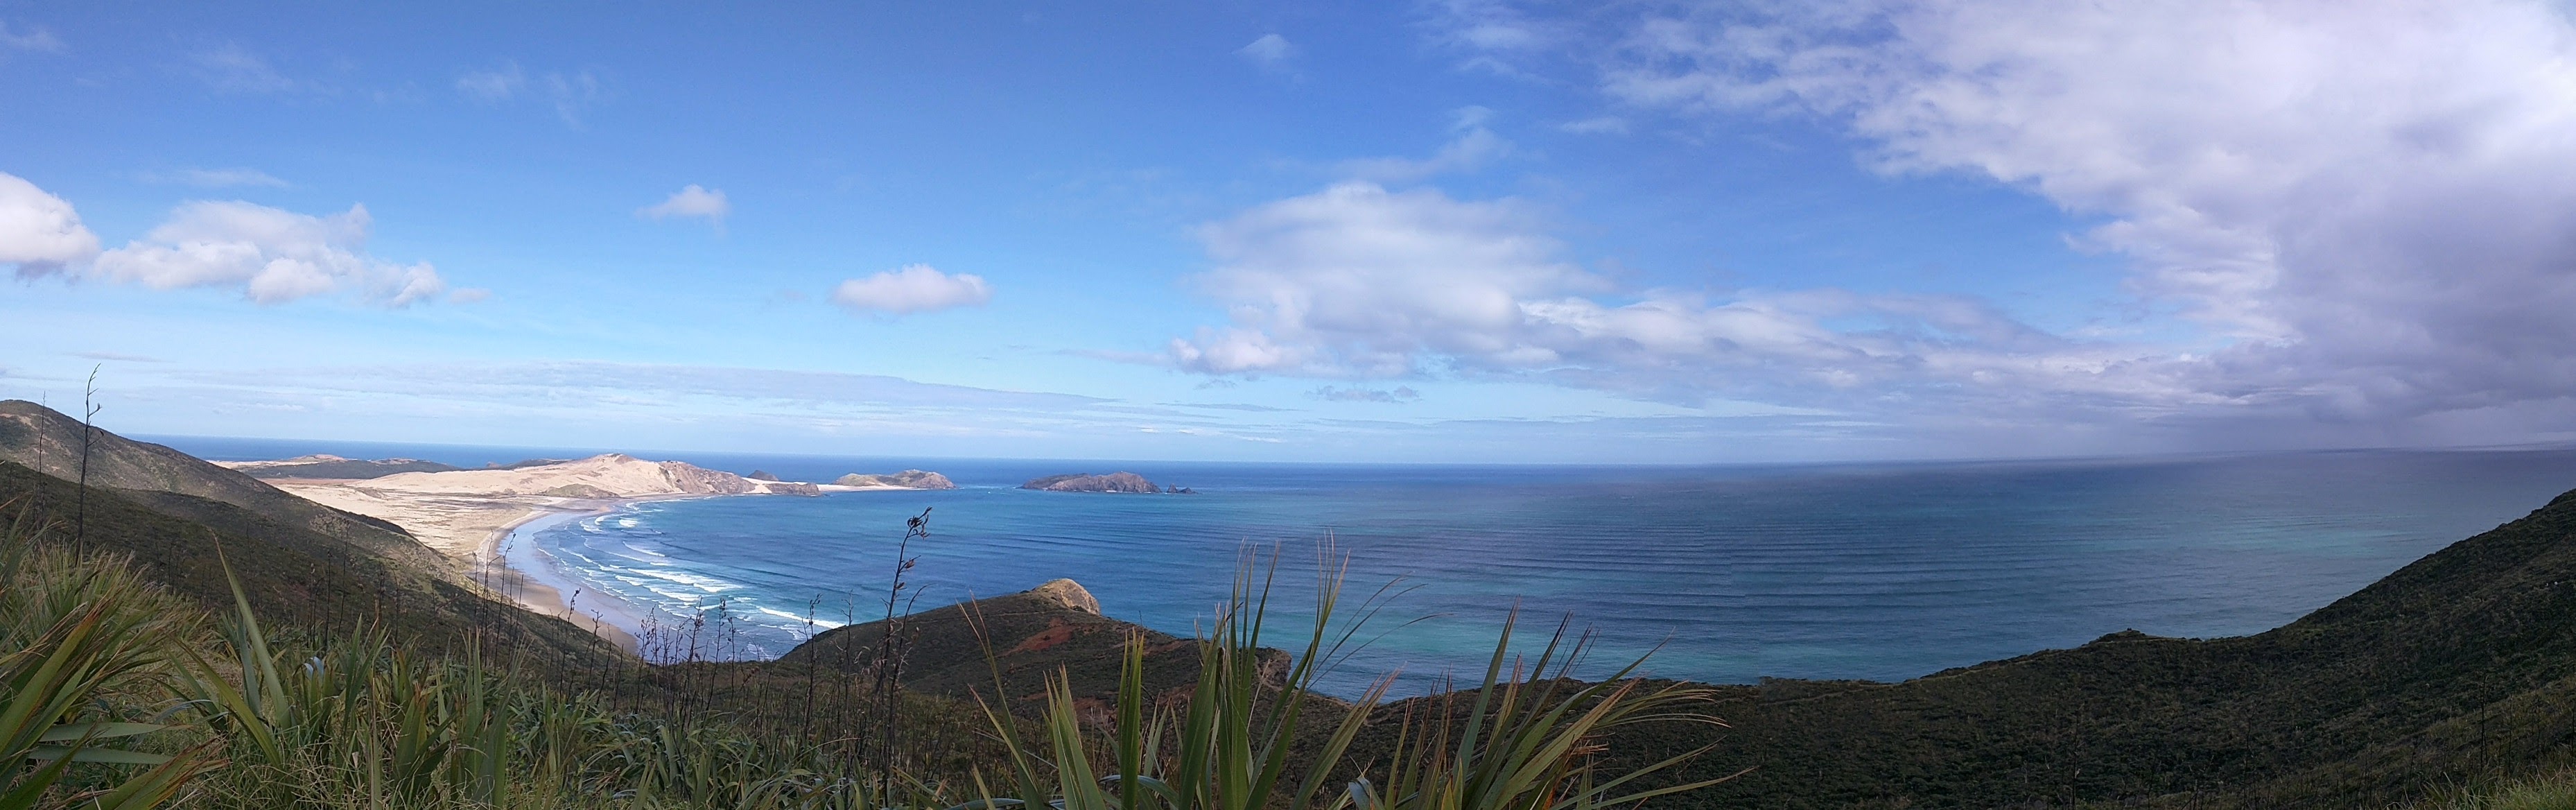 A view of the ocean from Cape Reinga, clearly depicting New Zealand's isolation.